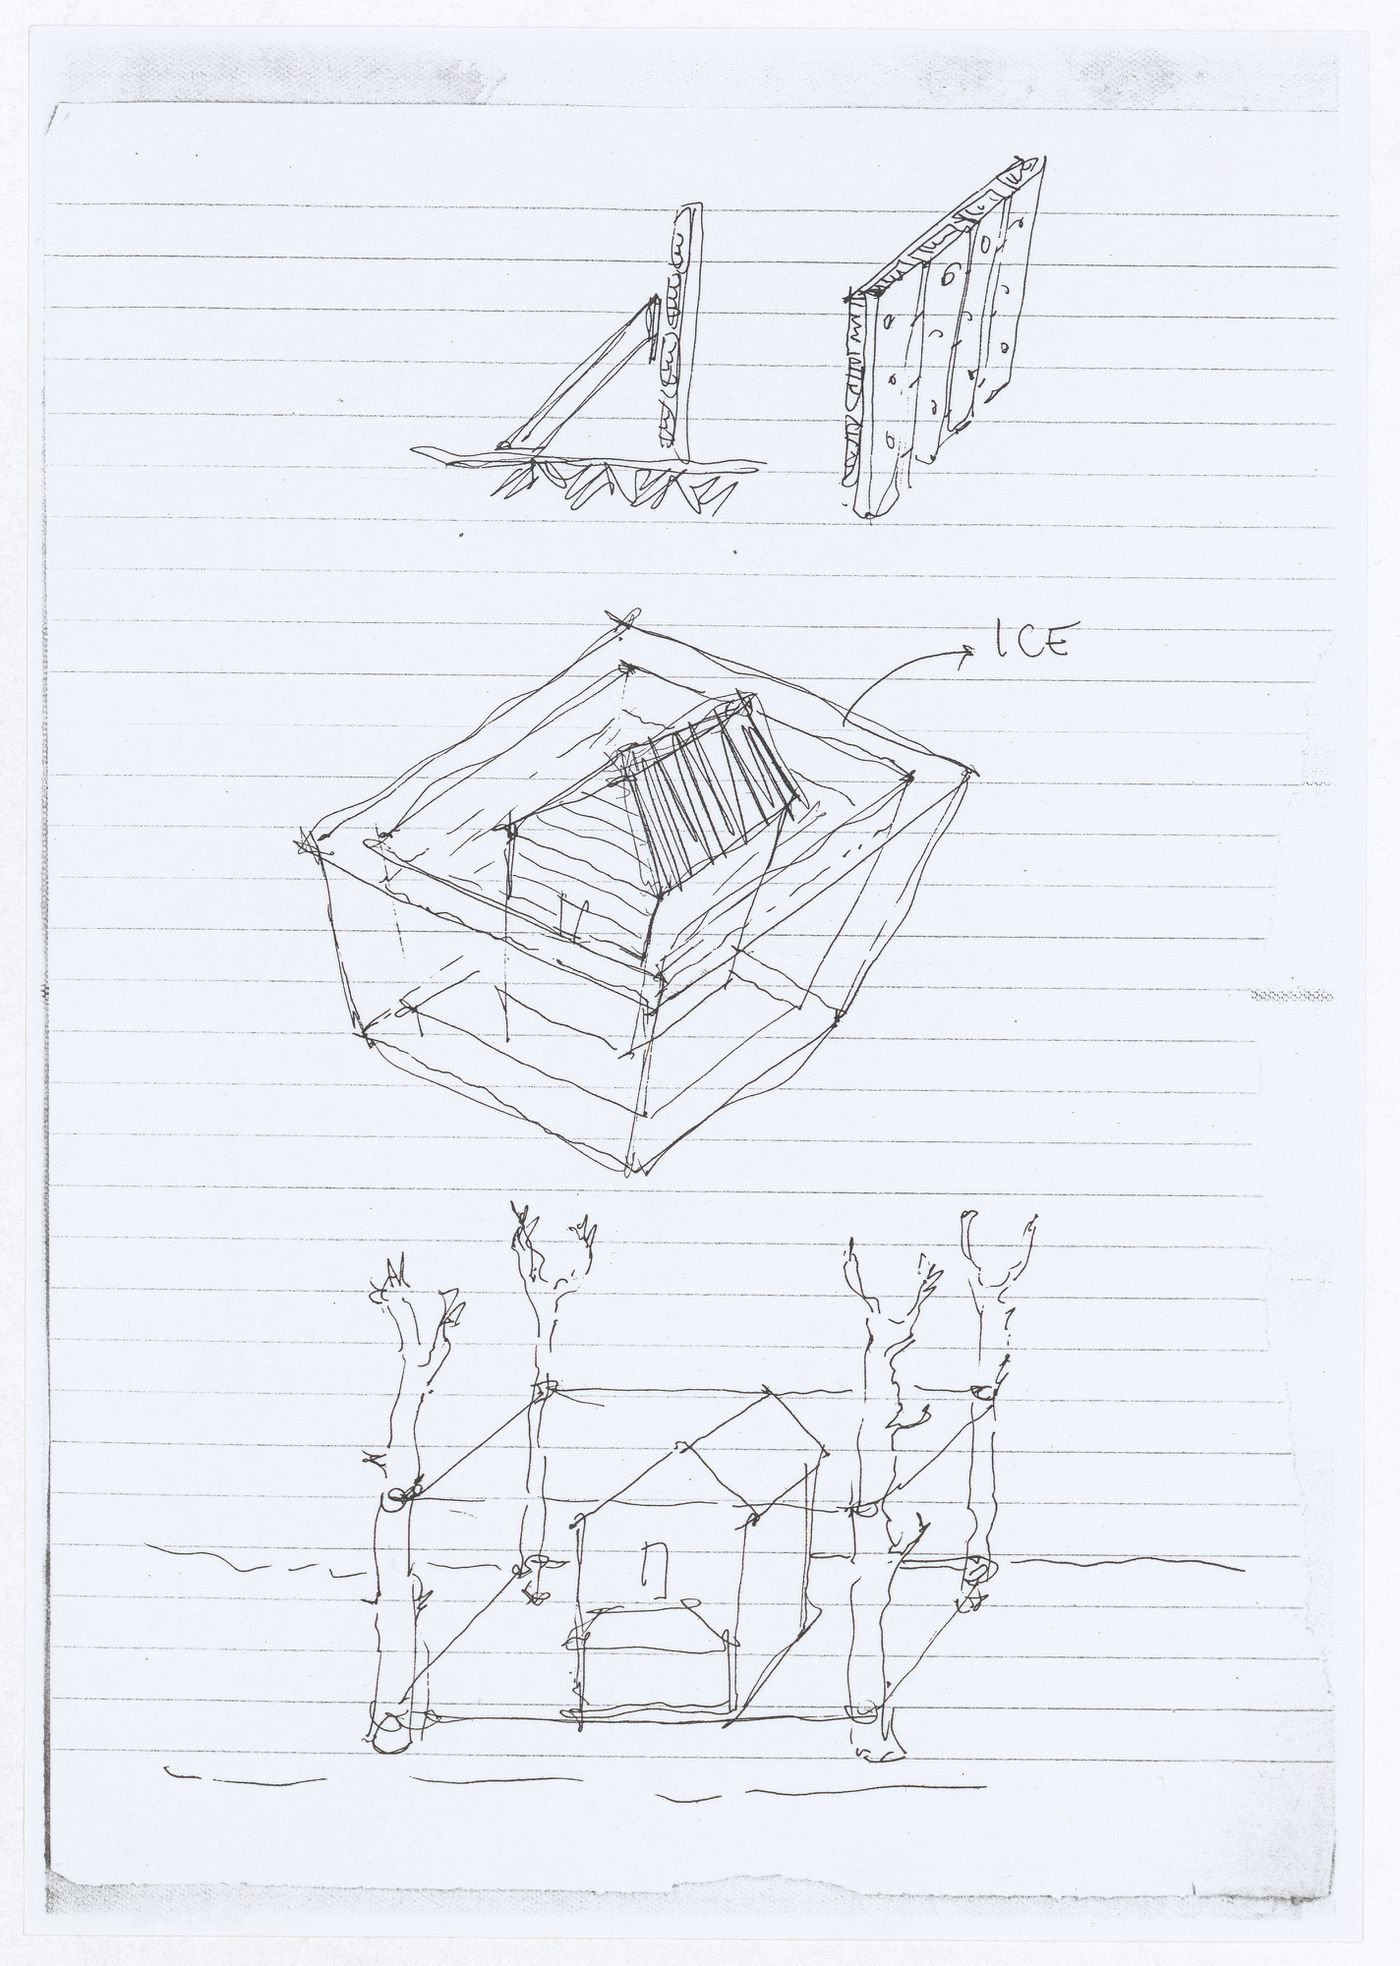 Sketches showing freezing methods for Ice House II